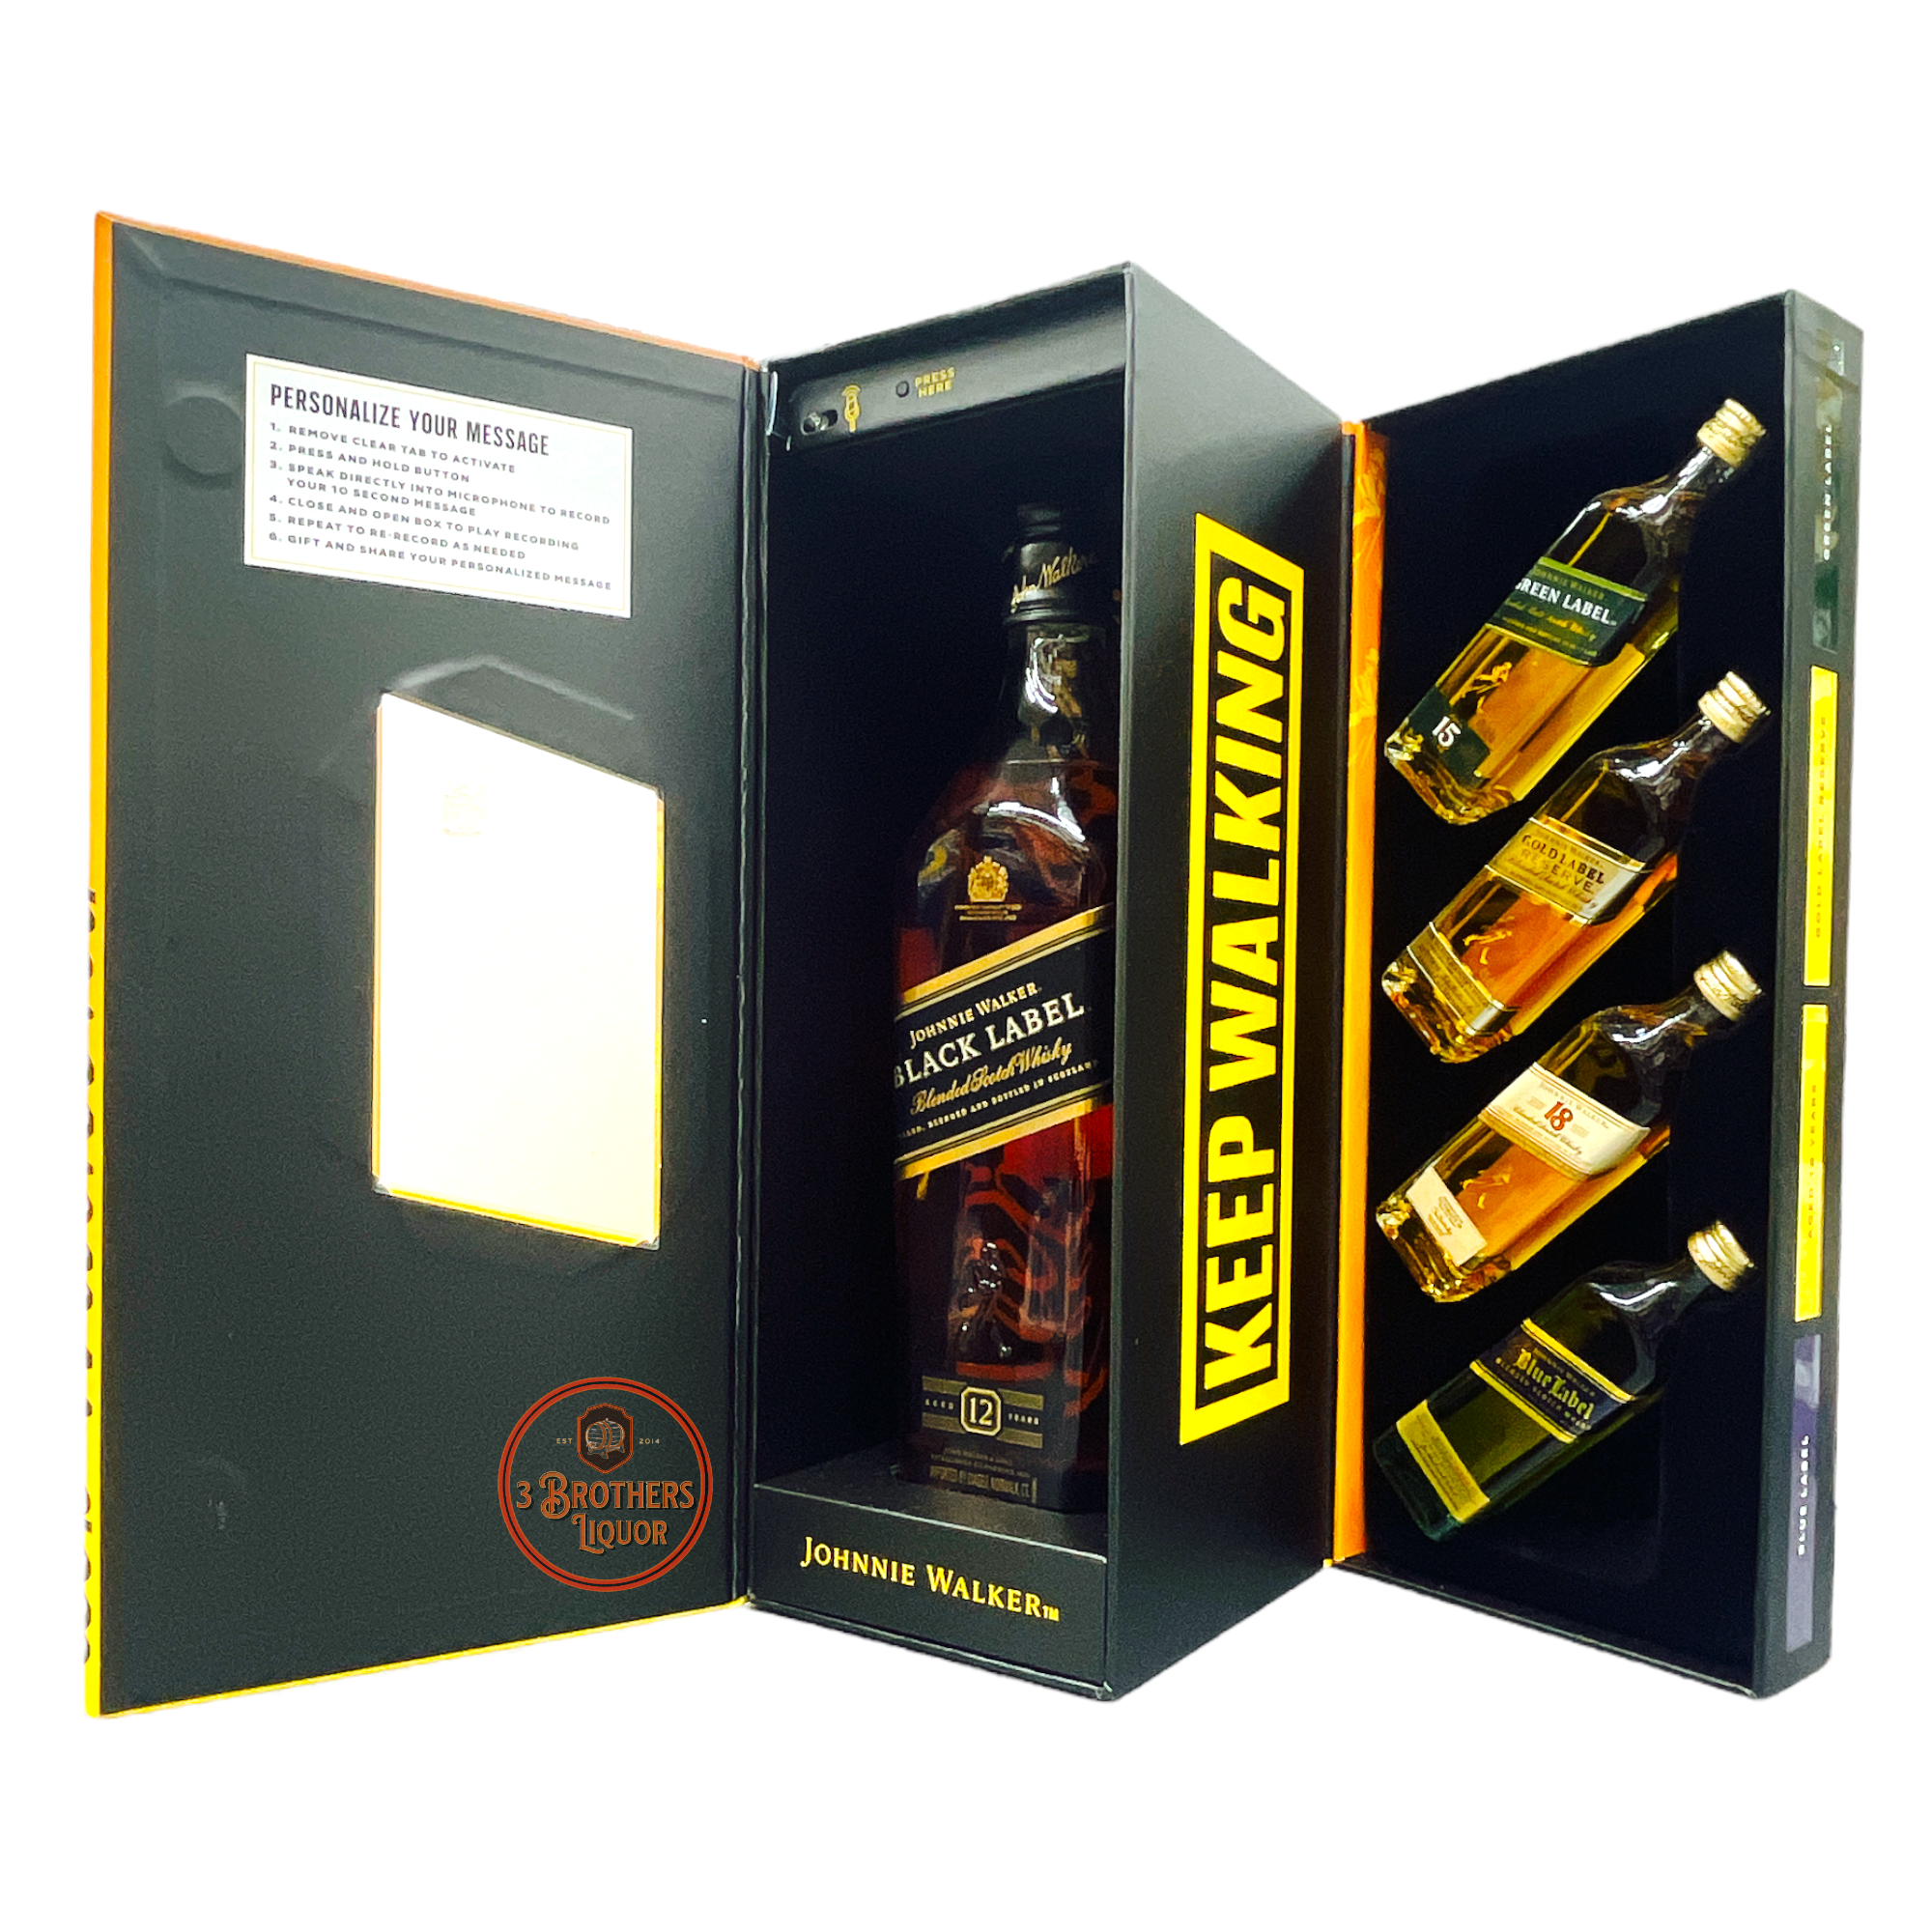 Johnnie Walker Black Label A Voice To Remember Gift Set W/ Voice Recorder And Shots